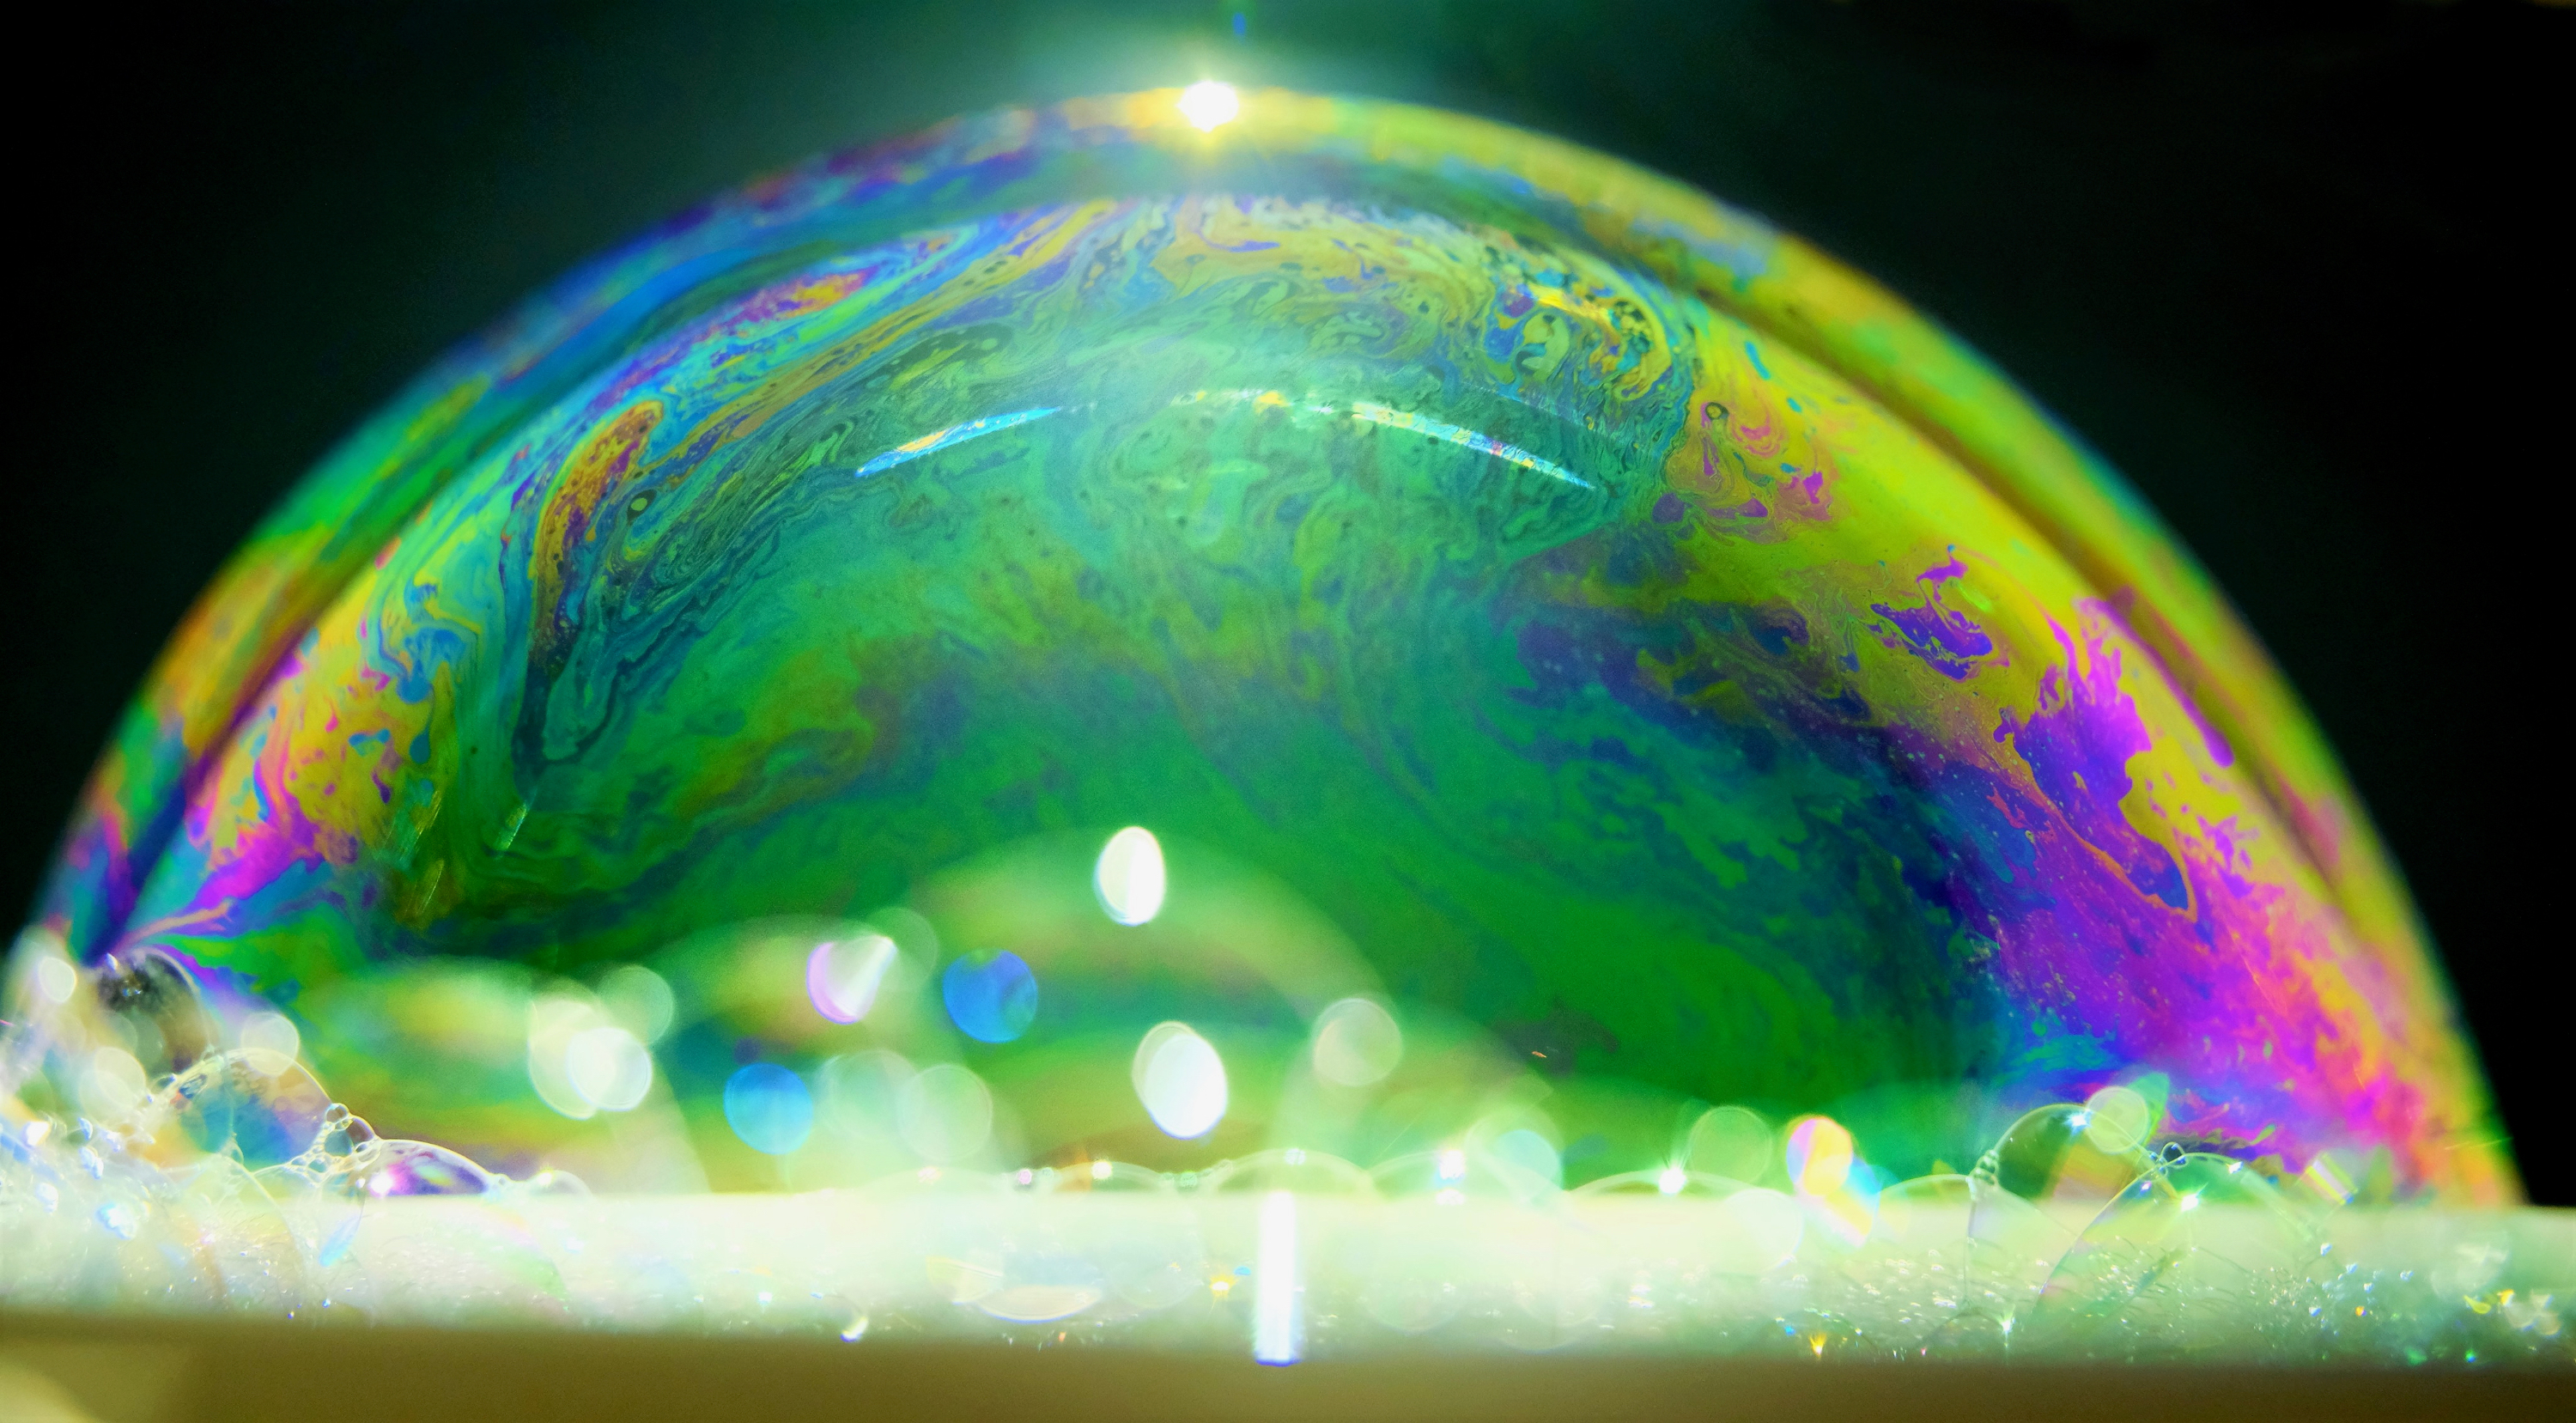 The chaotic patterns in a soap film are an example two-dimensional turbulence. This bubble was created using water and a weak dilution of detergent and sugar. In the thin wall of the bubble, vortex stretching is restricted, enstrophy is conserved, and different inertial range scalings occur than in 3D turbulence.
